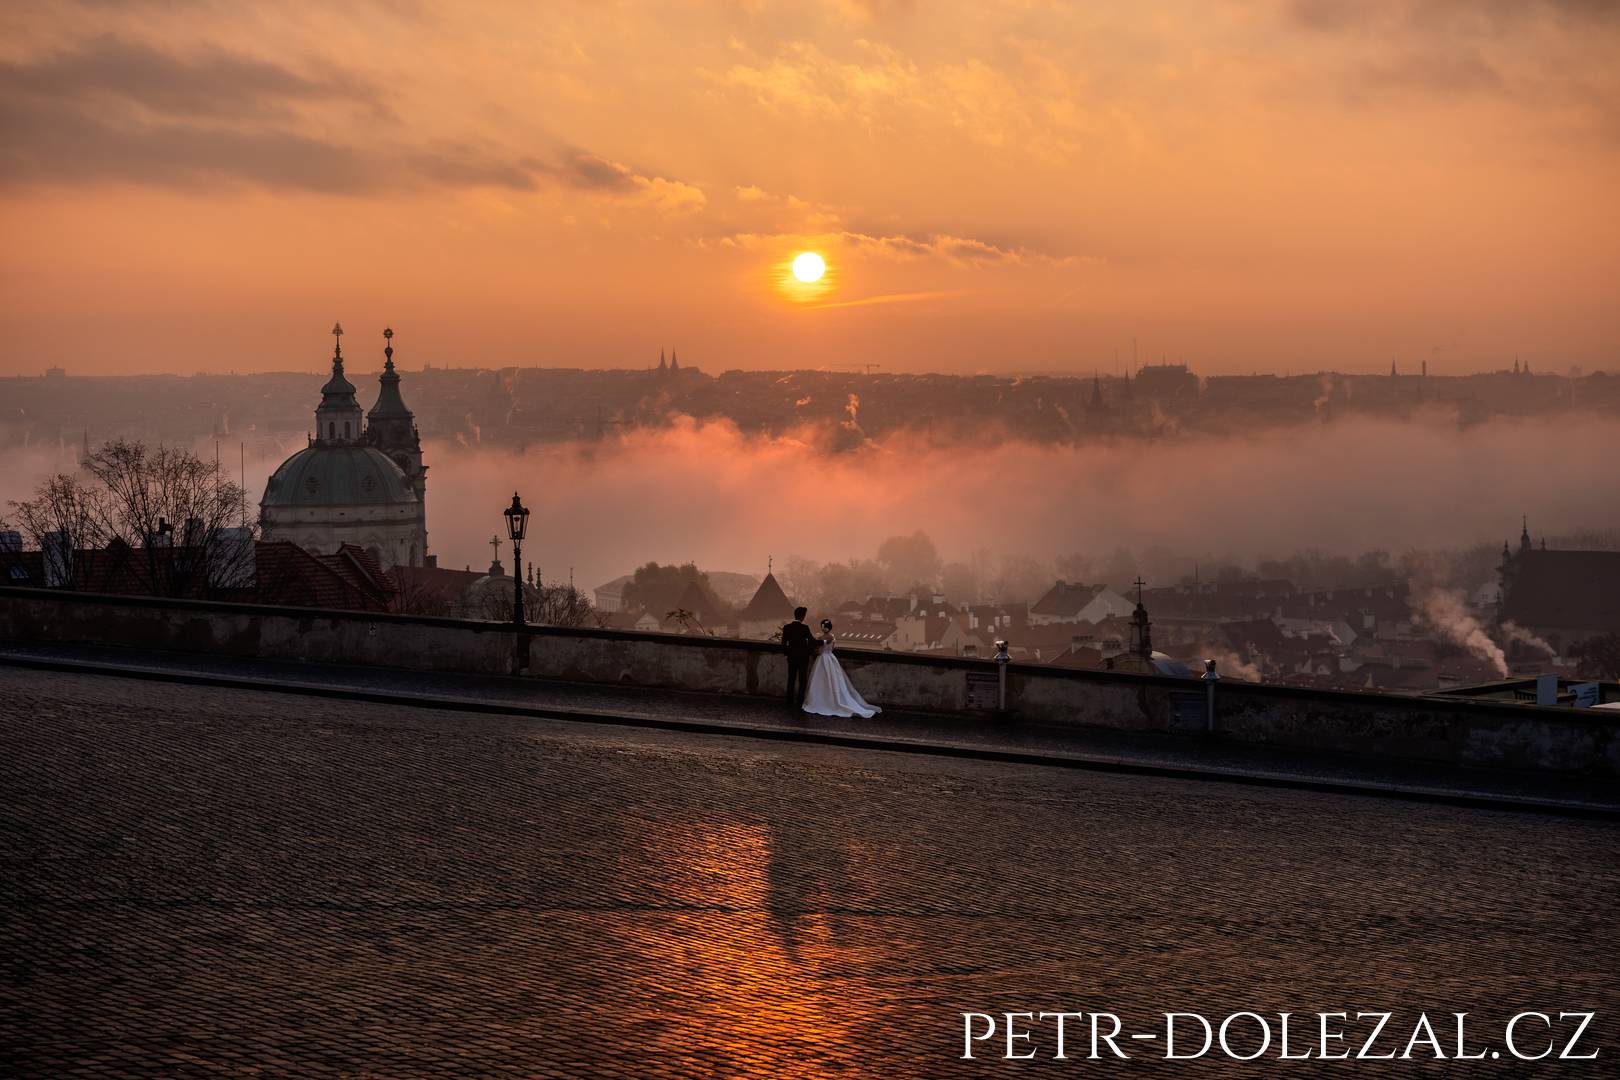 Groom and bride look out over the panorama of Prague rooftops at sunrise, foggy haze over Prague